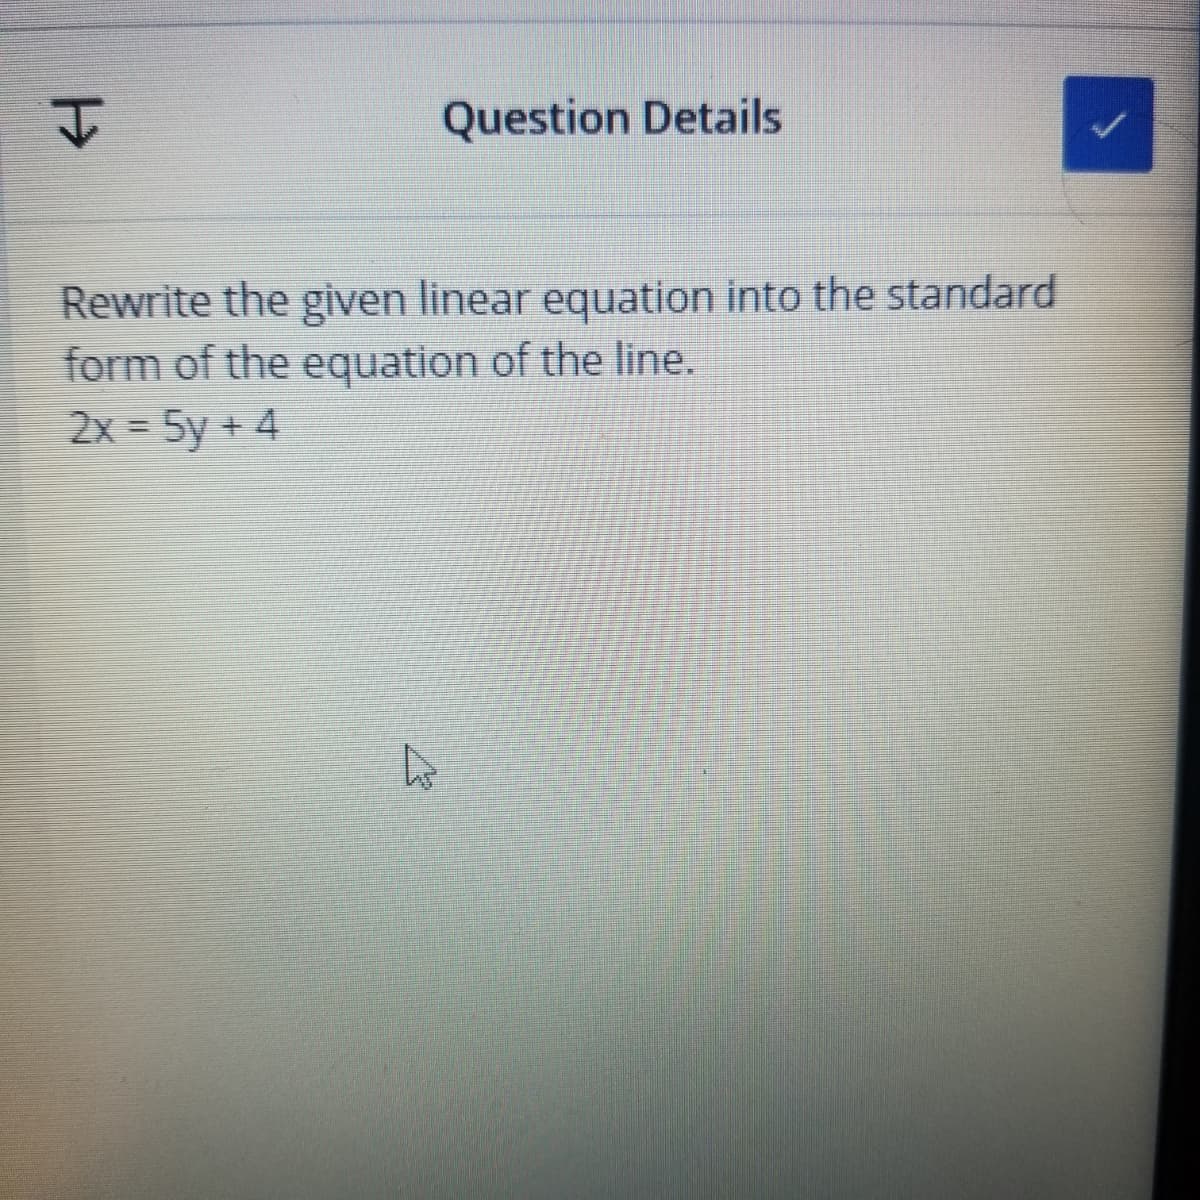 Question Details
Rewrite the given linear equation into the standard
form of the equation of the line.
2x = 5y + 4
